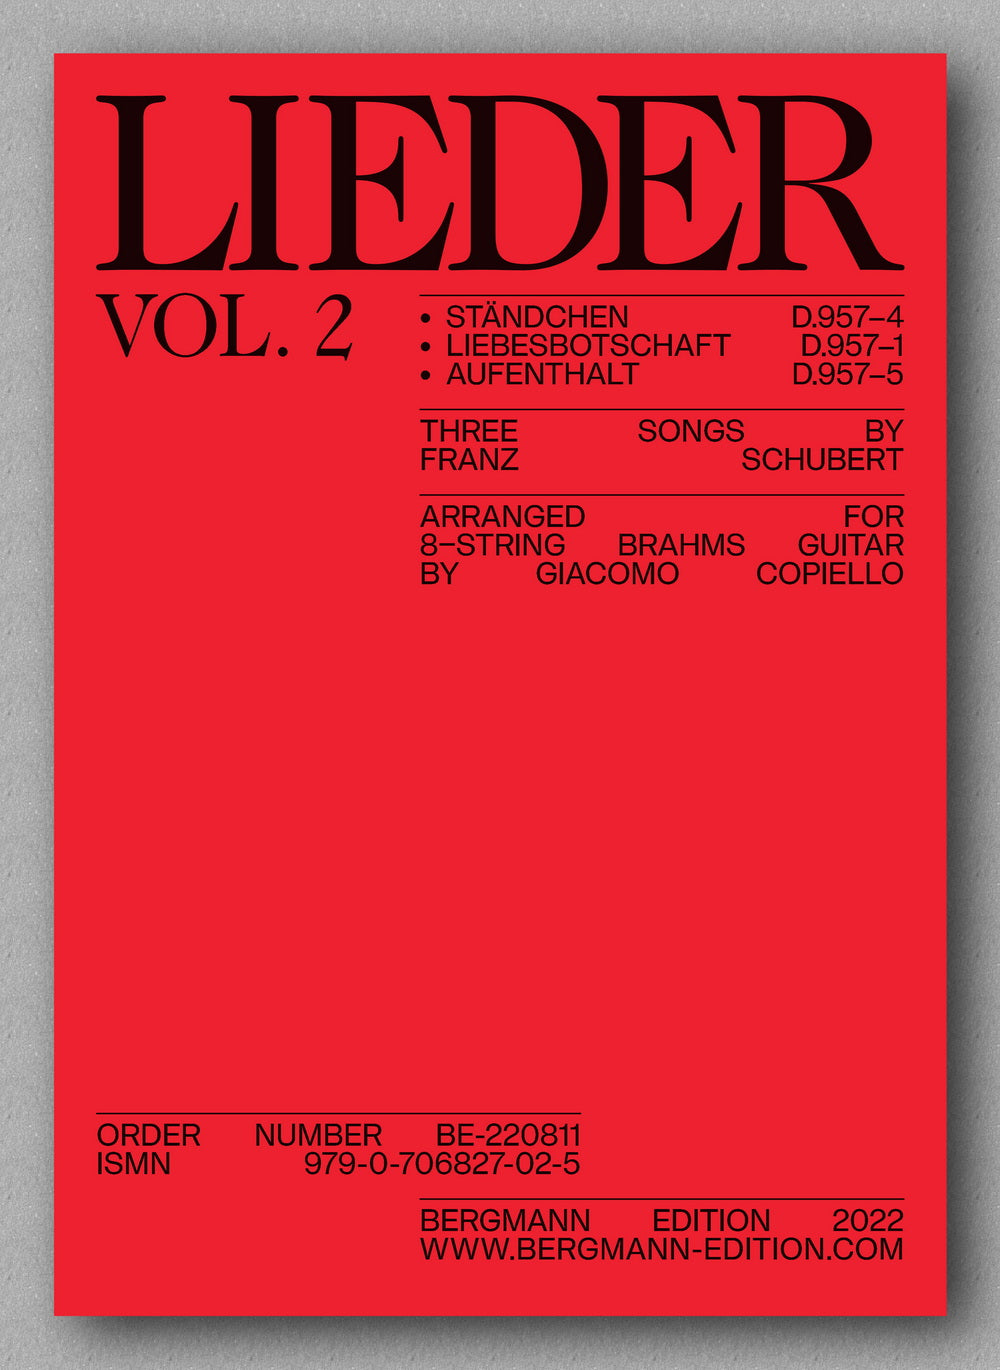 Lieder vol. 2, by Franz Schubert  - preview of the cover